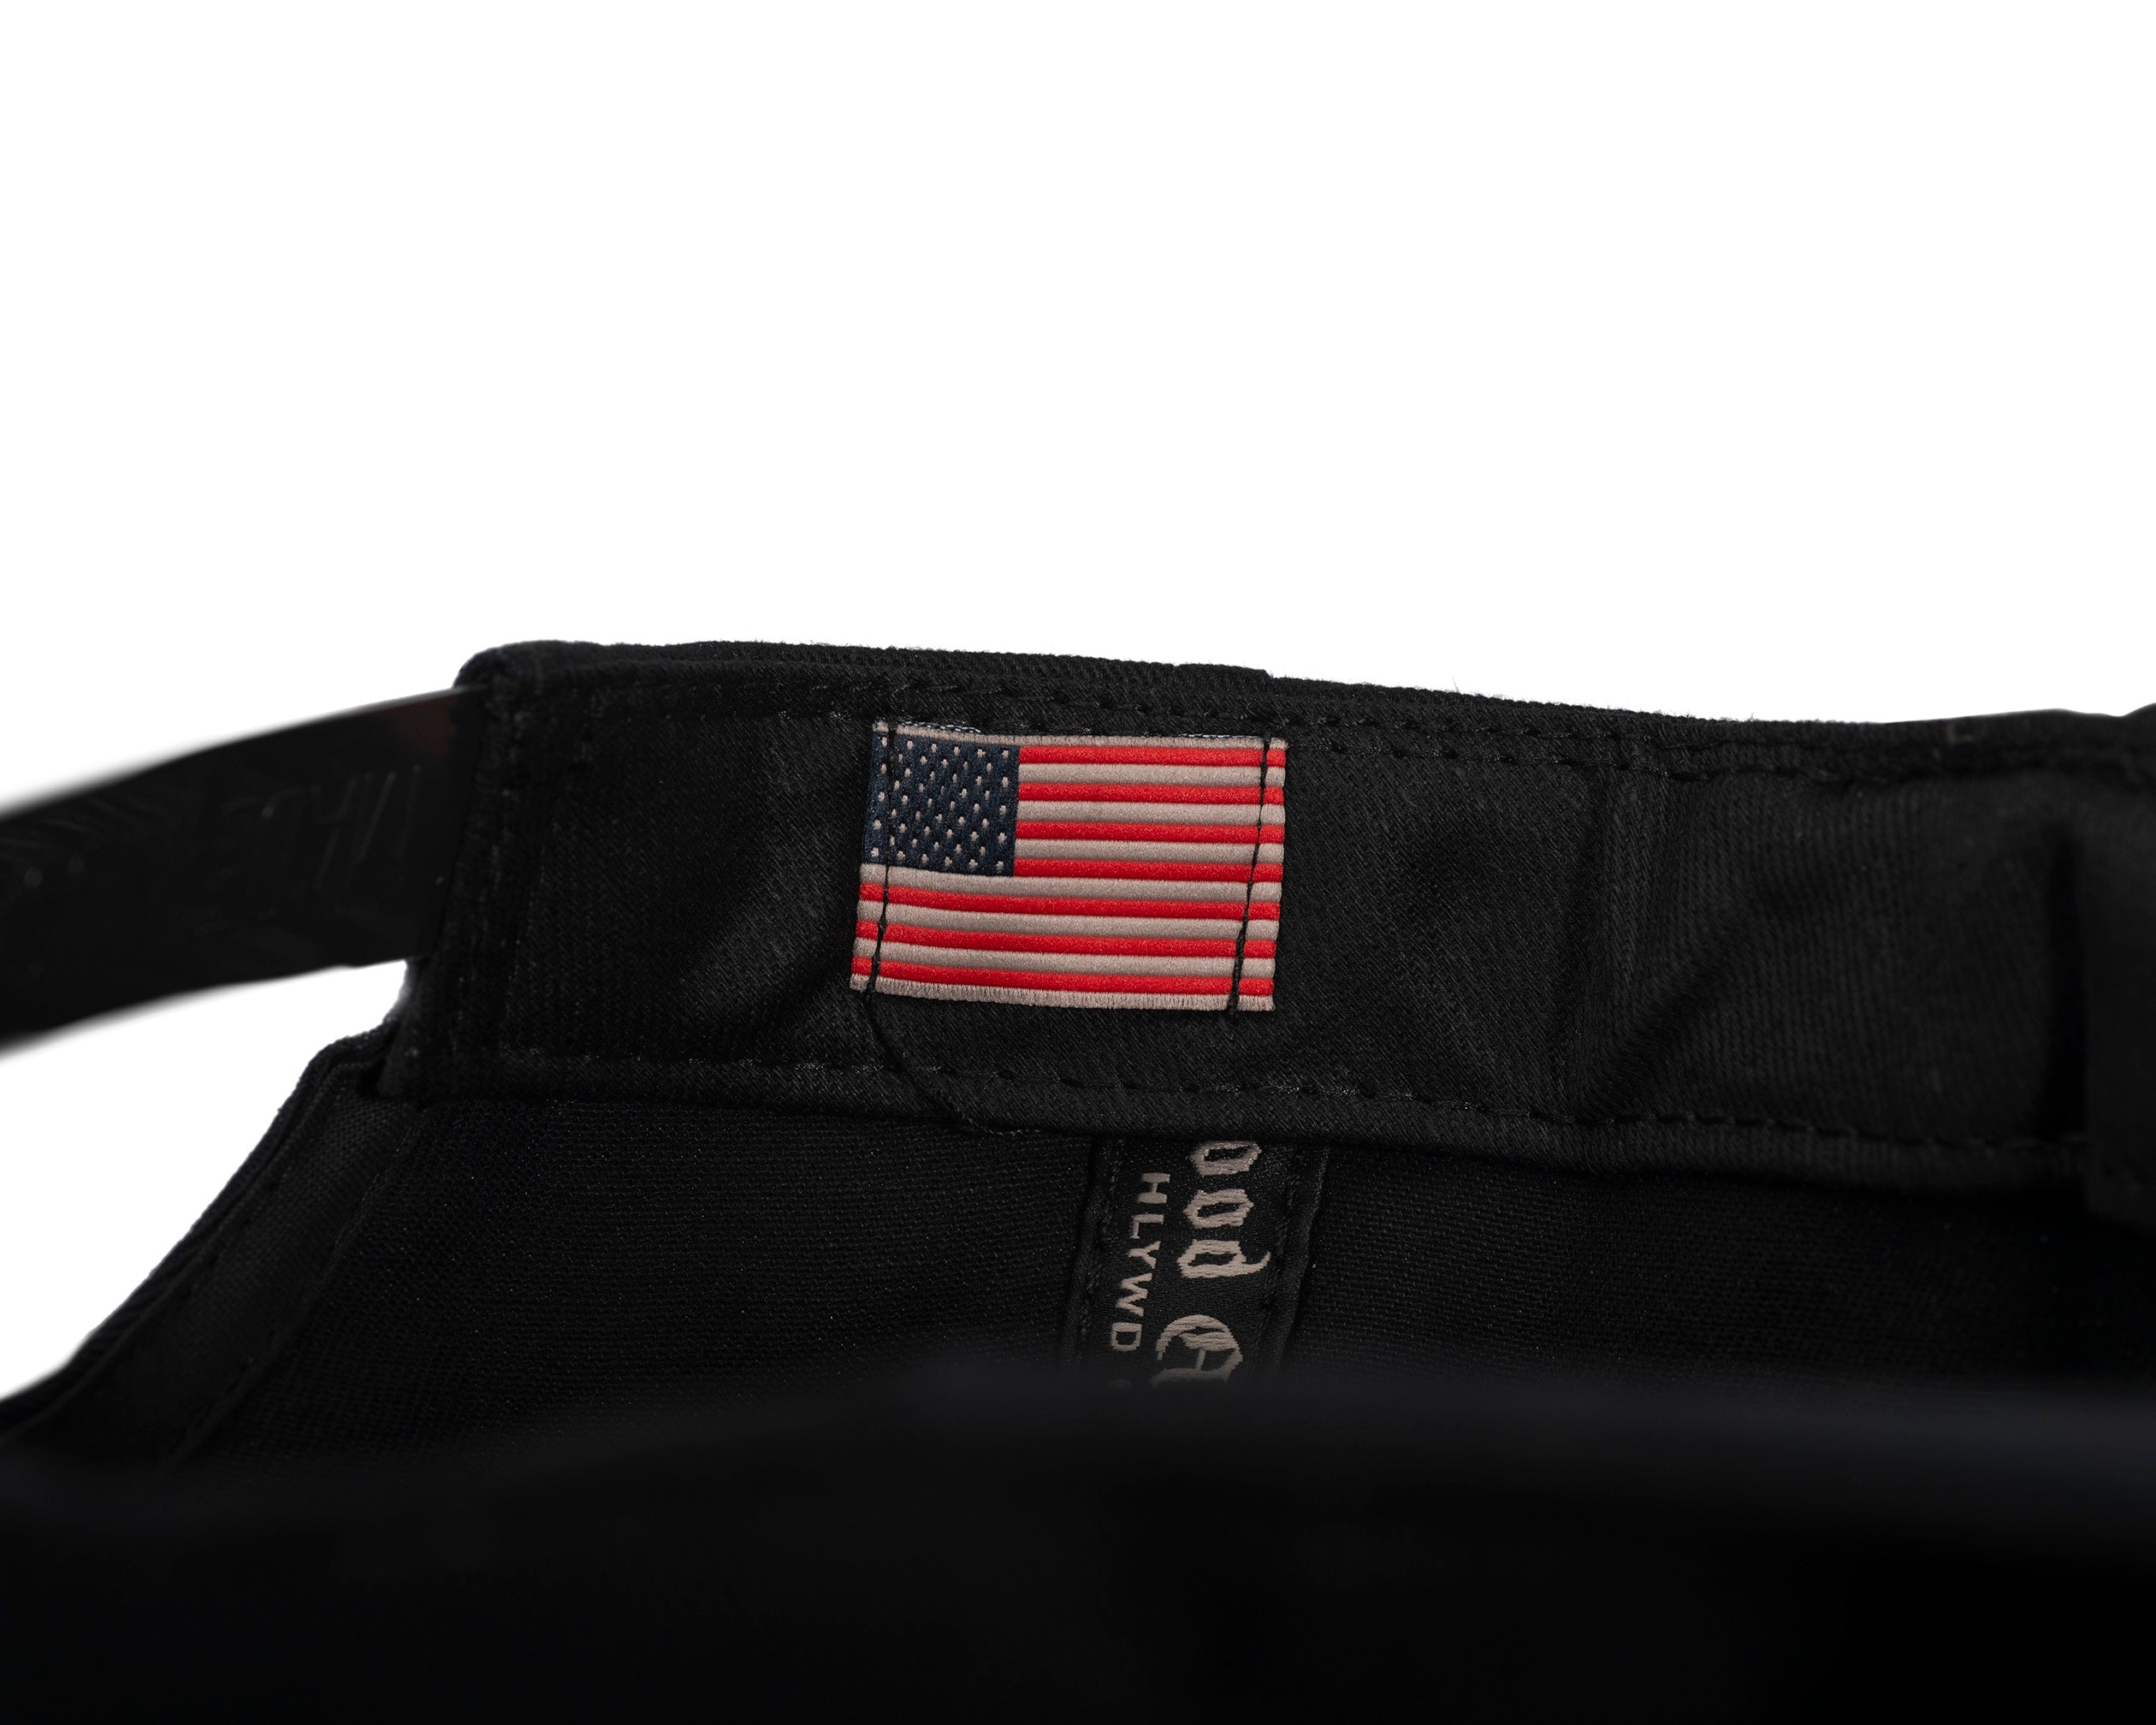 tiny American flag patch stitched in on inside of the hat